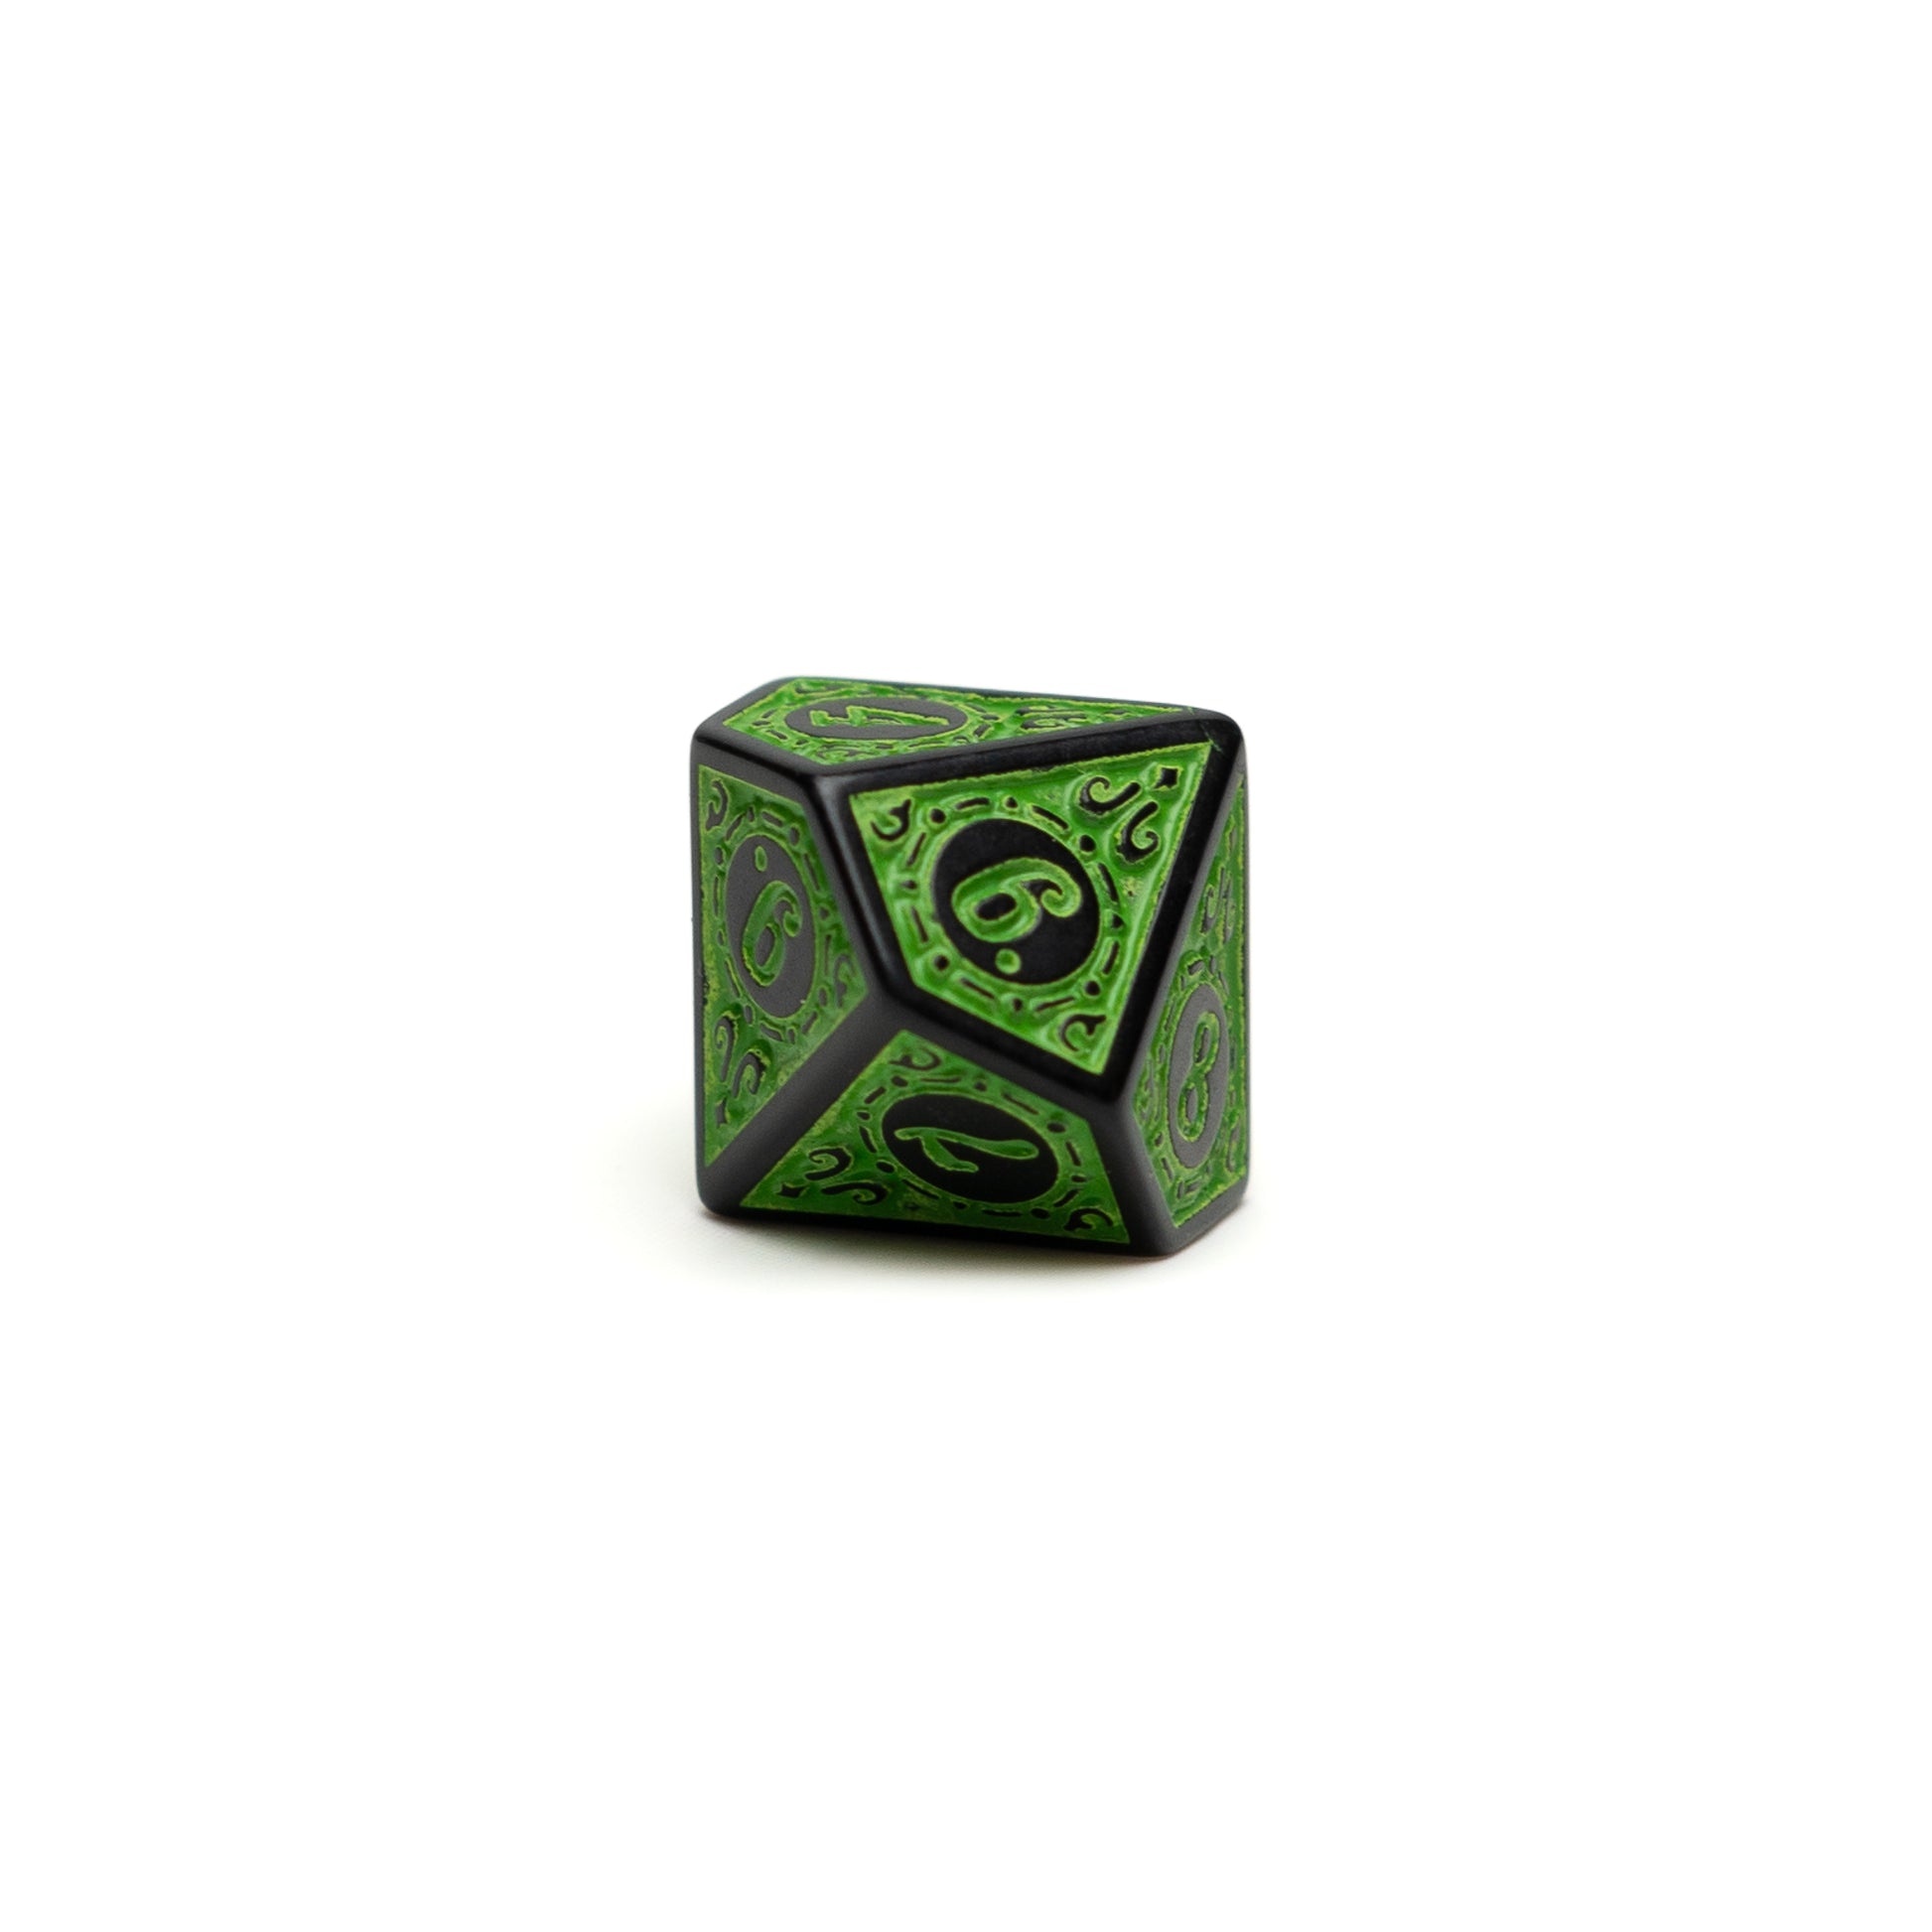 Roll Britannia Keth Frostiron Dungeons and Dragons D10 Dice with Green Military Aesthetic